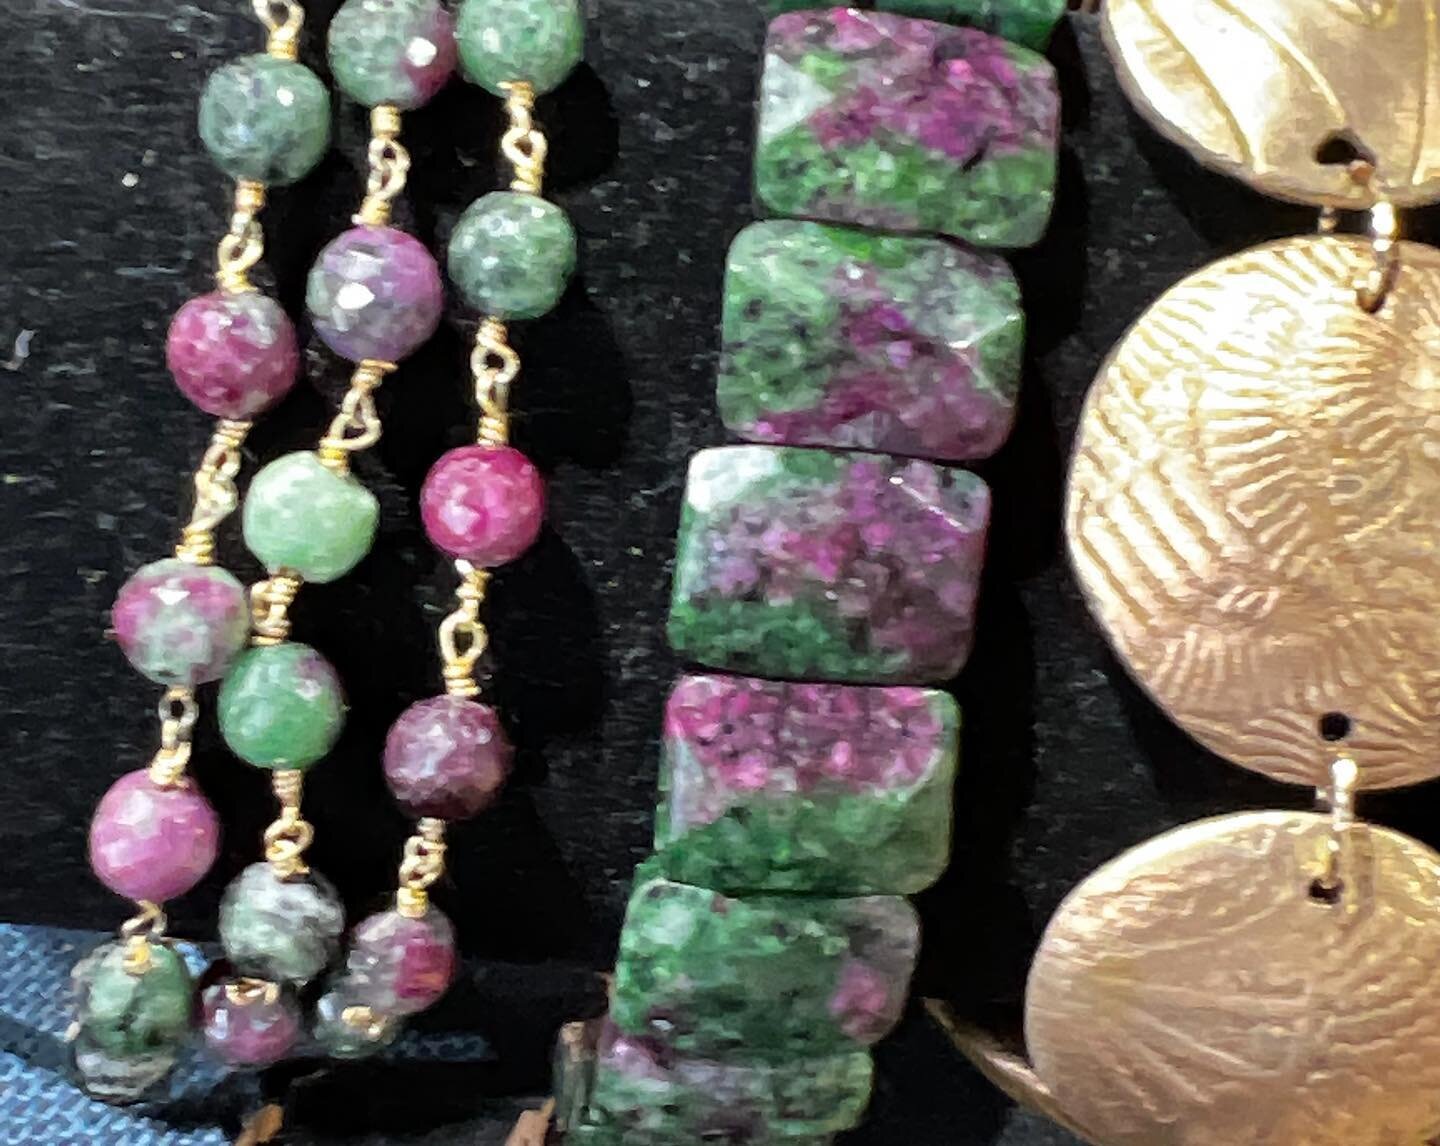 Ruby and Zoisite Bracelets. Shown at Plum Nelly Gallery in Chattanooga. Small Business Saturday  #shoplocally #shopnorthshorechattanooga #plumnelly #smallbusinesses